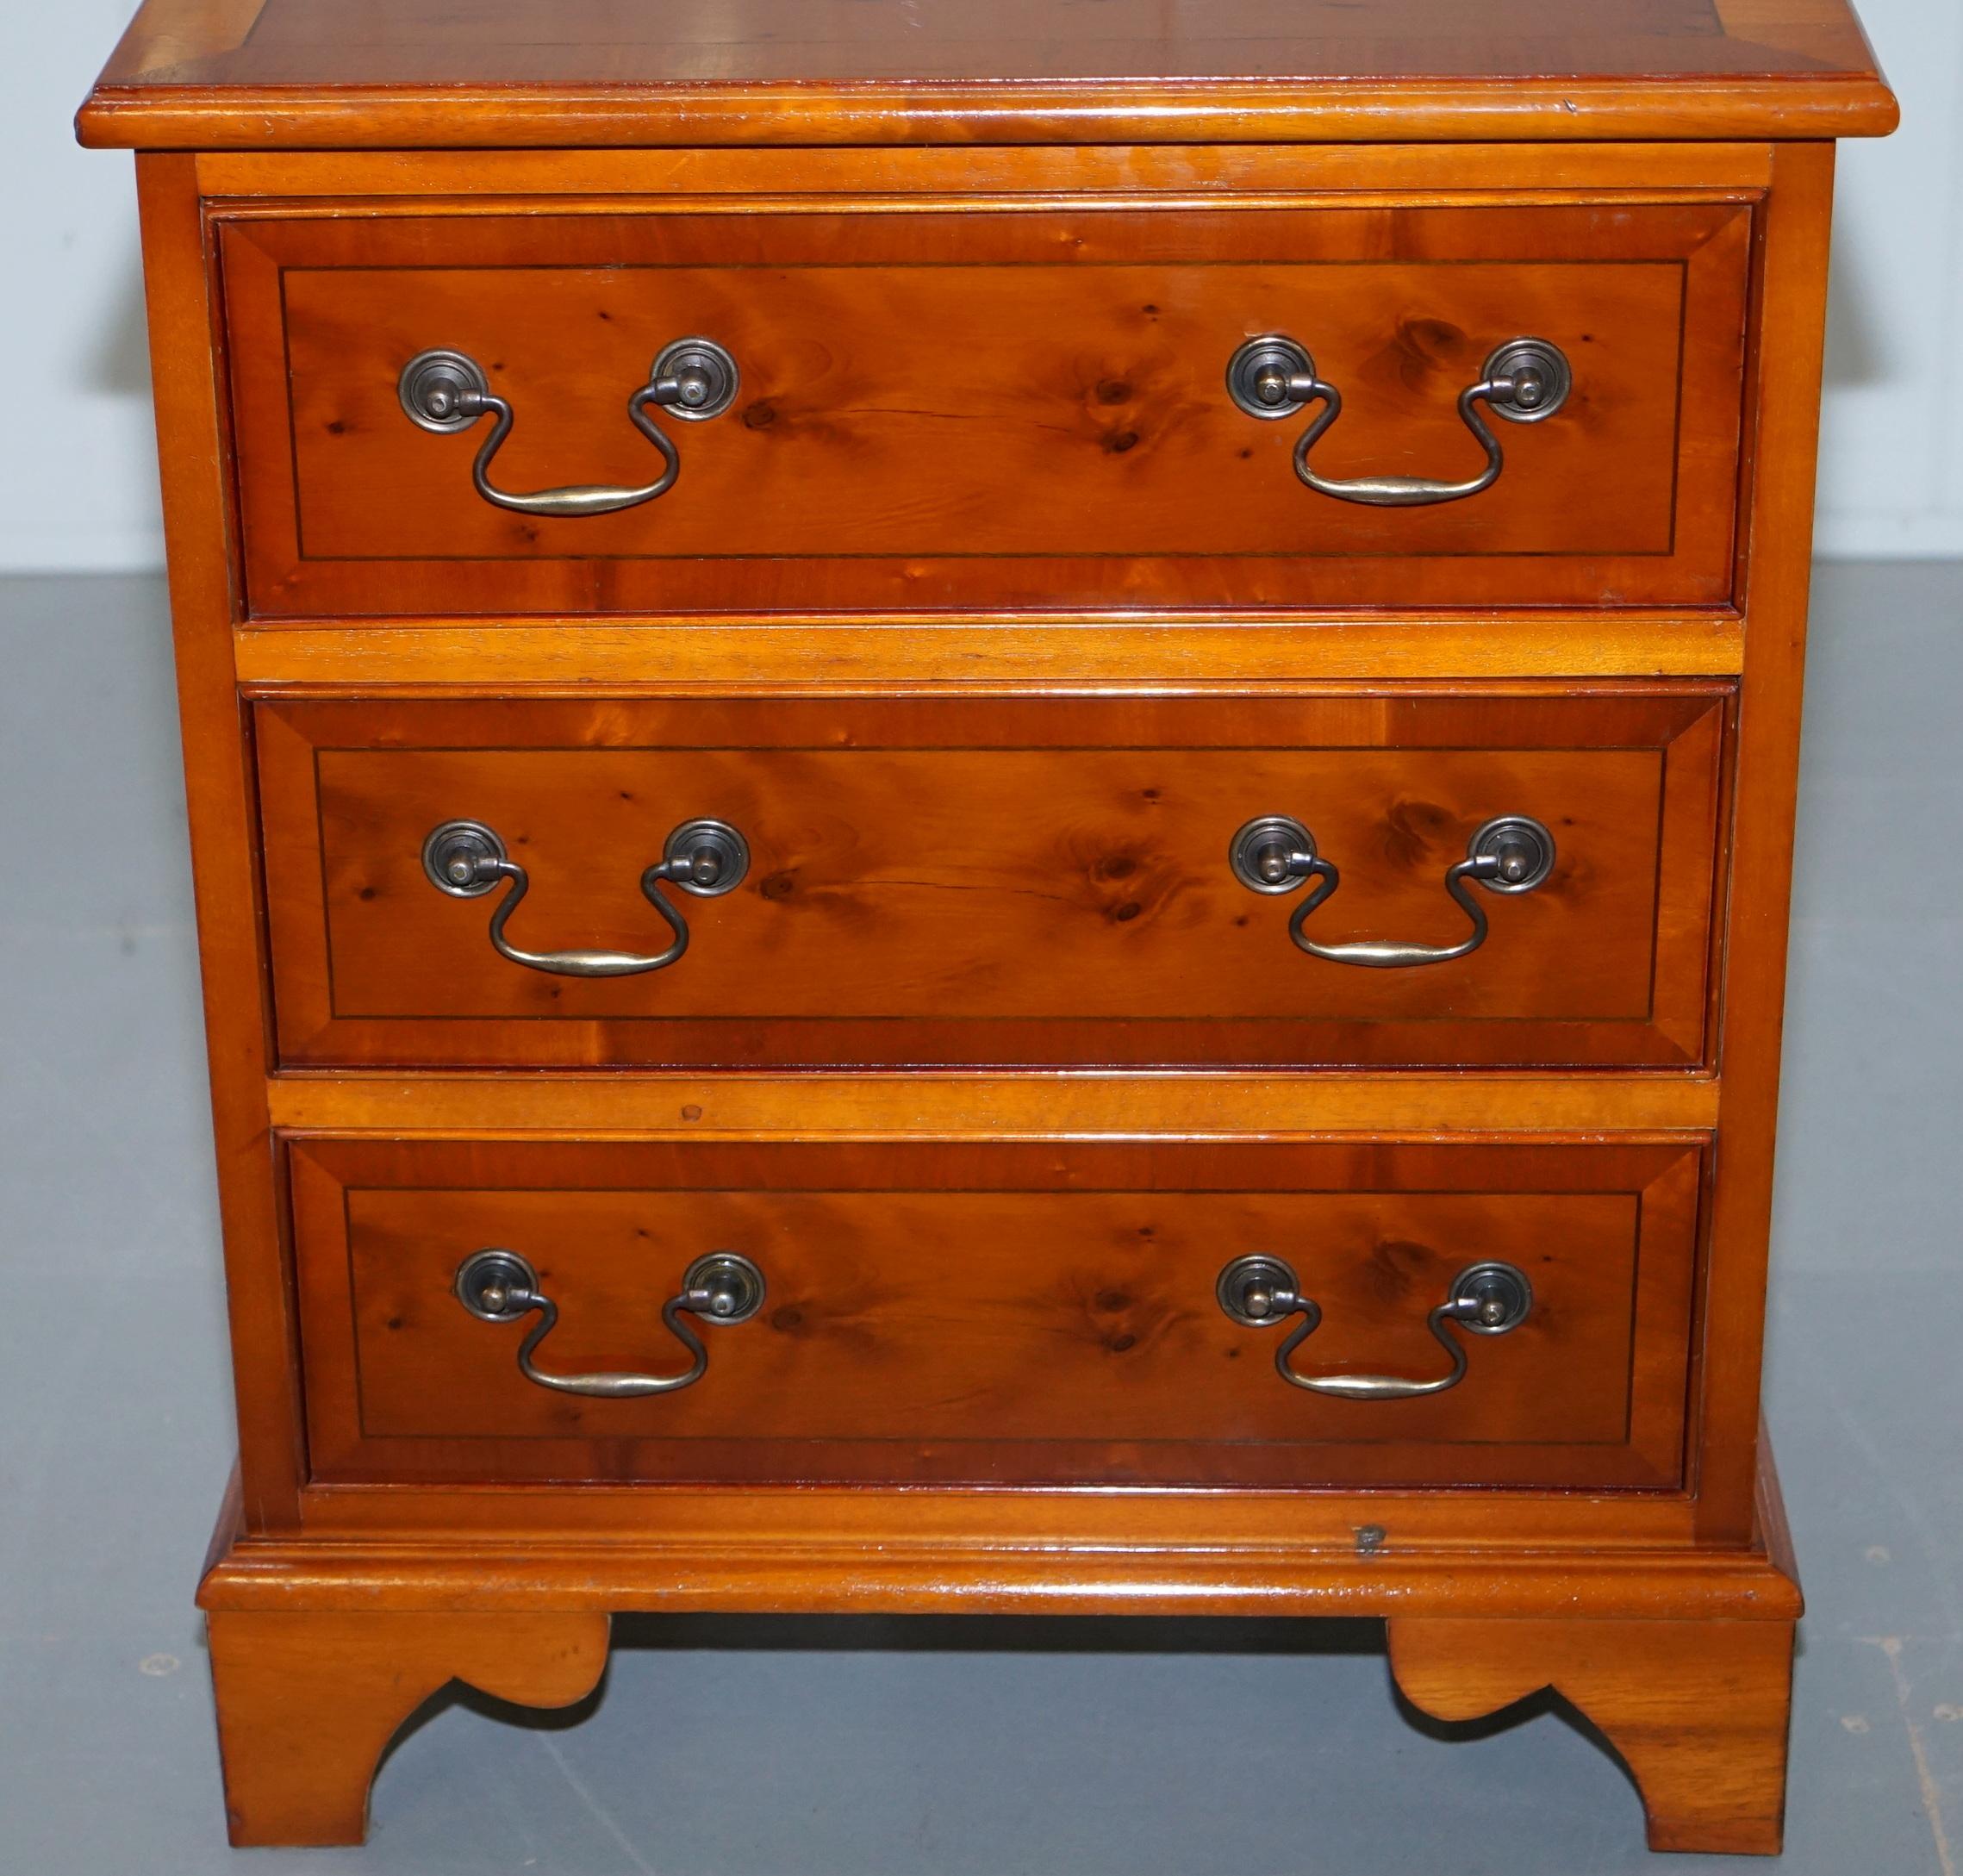 20th Century Small Burr Yew Wood Side Table Sized Chest of Drawers Great for Office Home Bed